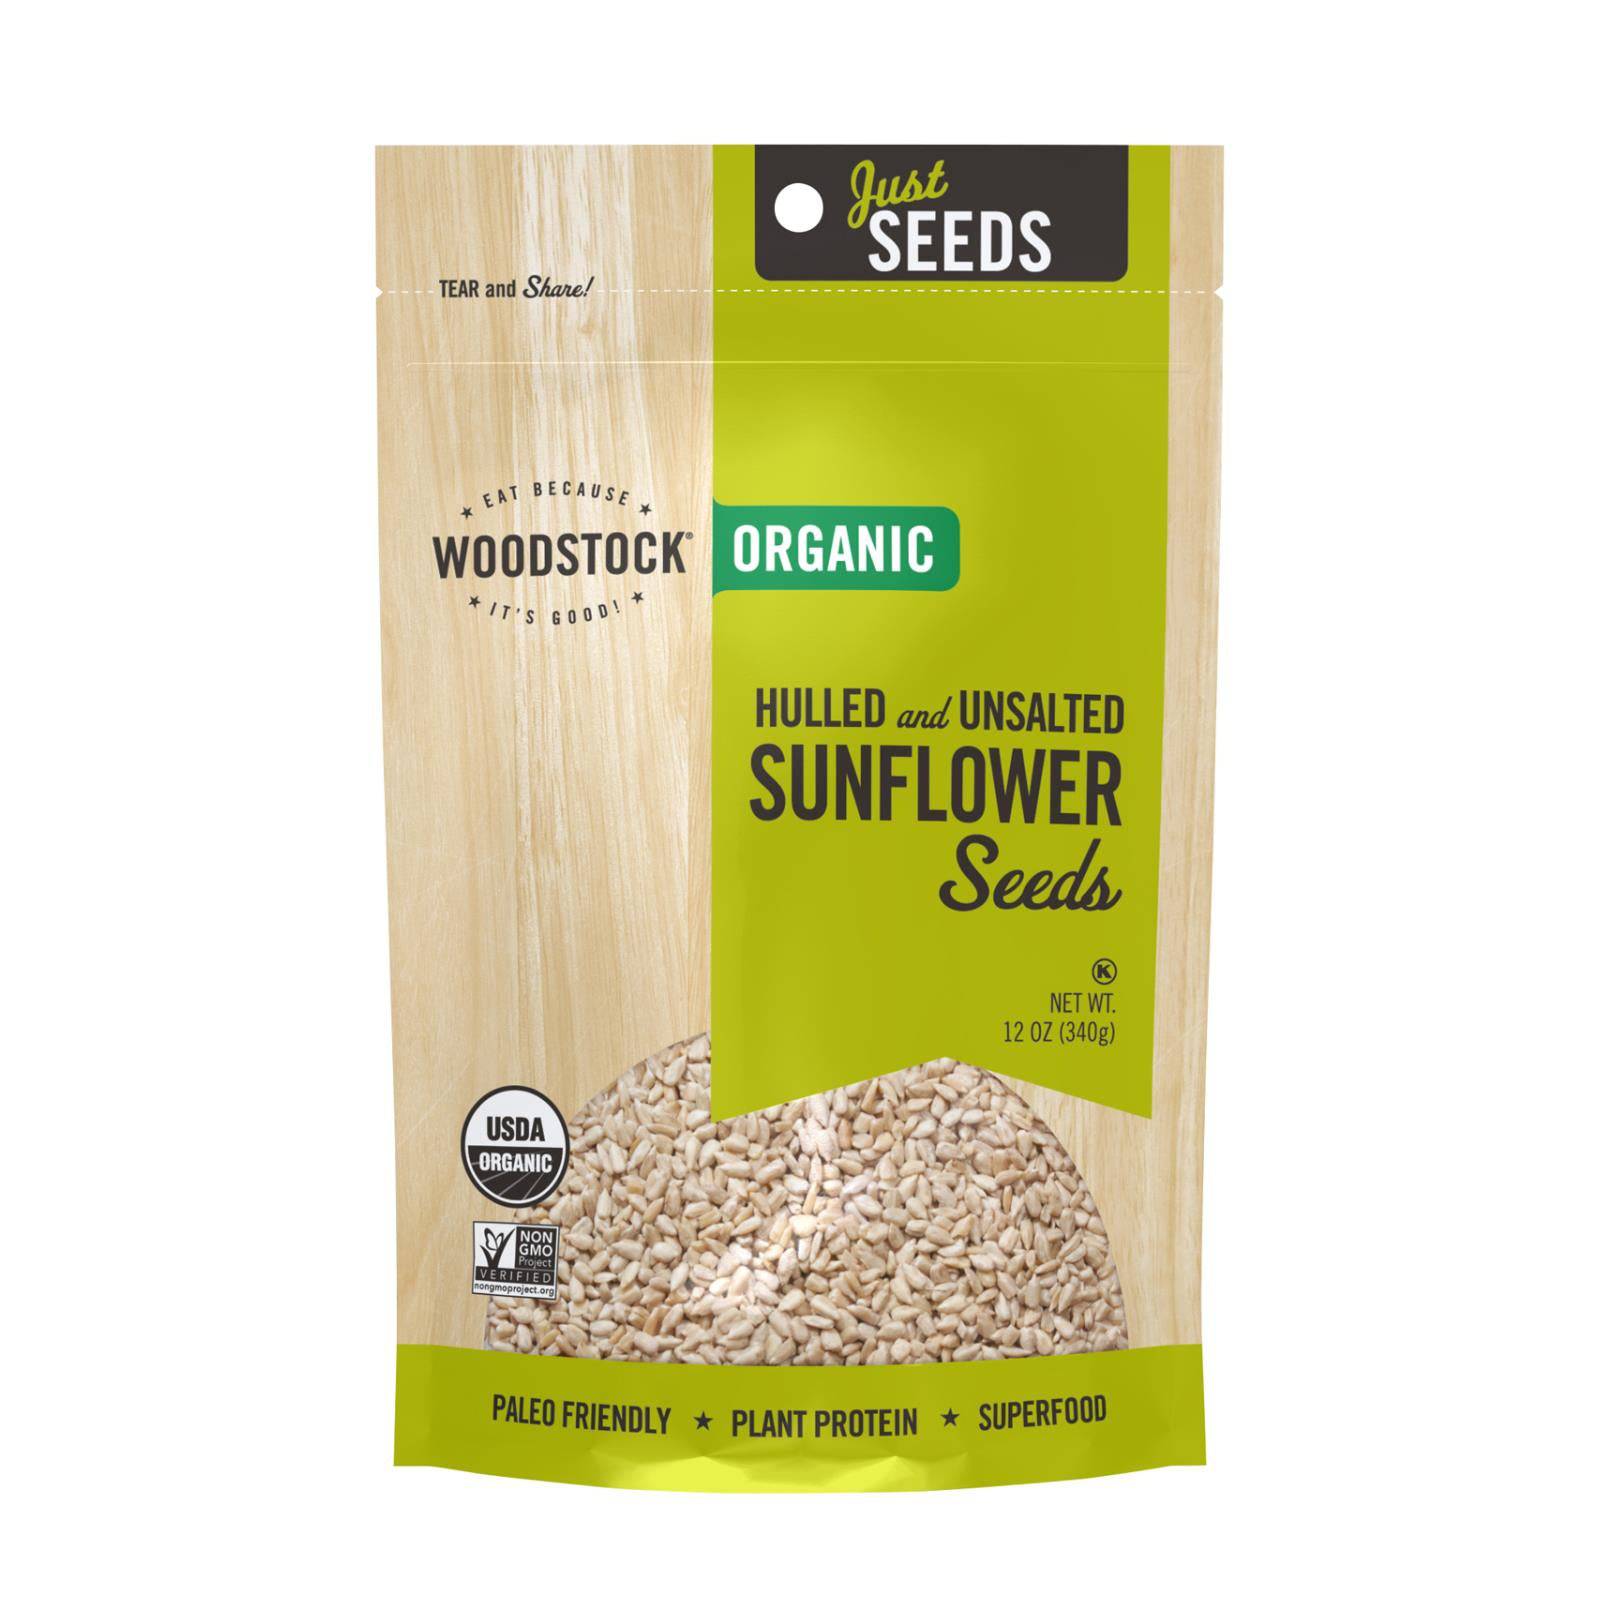 Woodstock Organic Hulled And Unsalted Sunflower Seeds - Case Of 8 - 12 Oz | OnlyNaturals.us